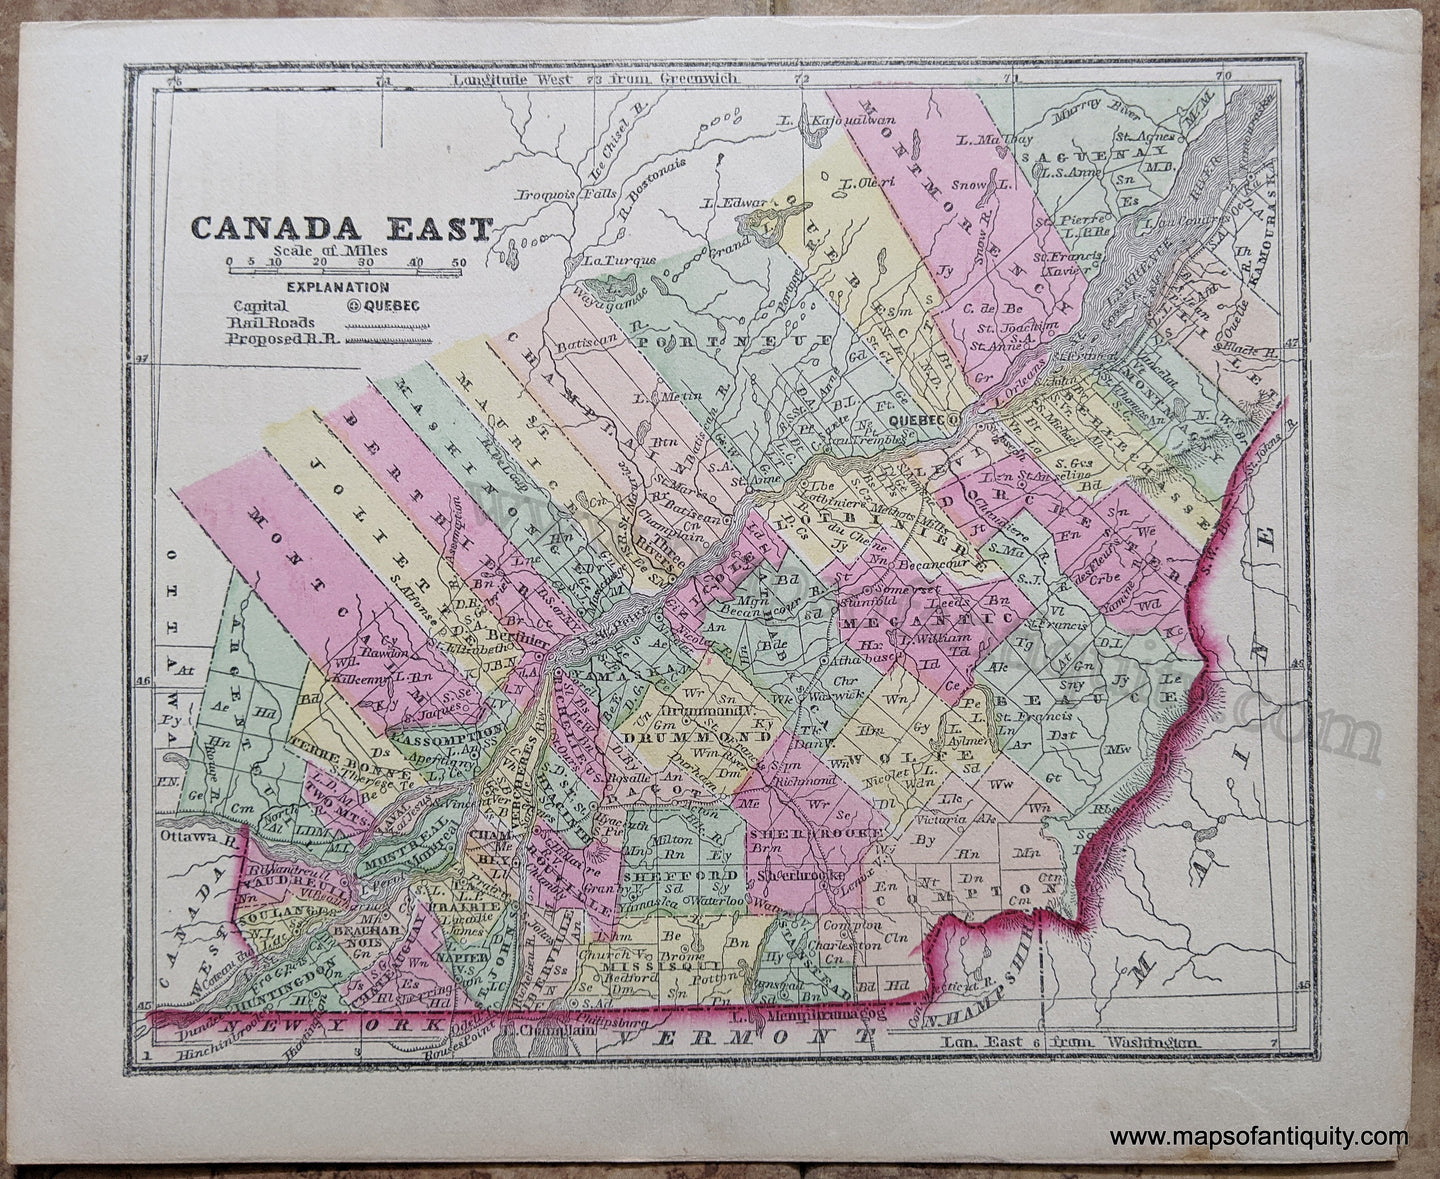 Antique-Hand-Colored-Map-Canada-East-Canada-Central-1857-Morse-and-Gaston-Maps-Of-Antiquity-1800s-19th-century